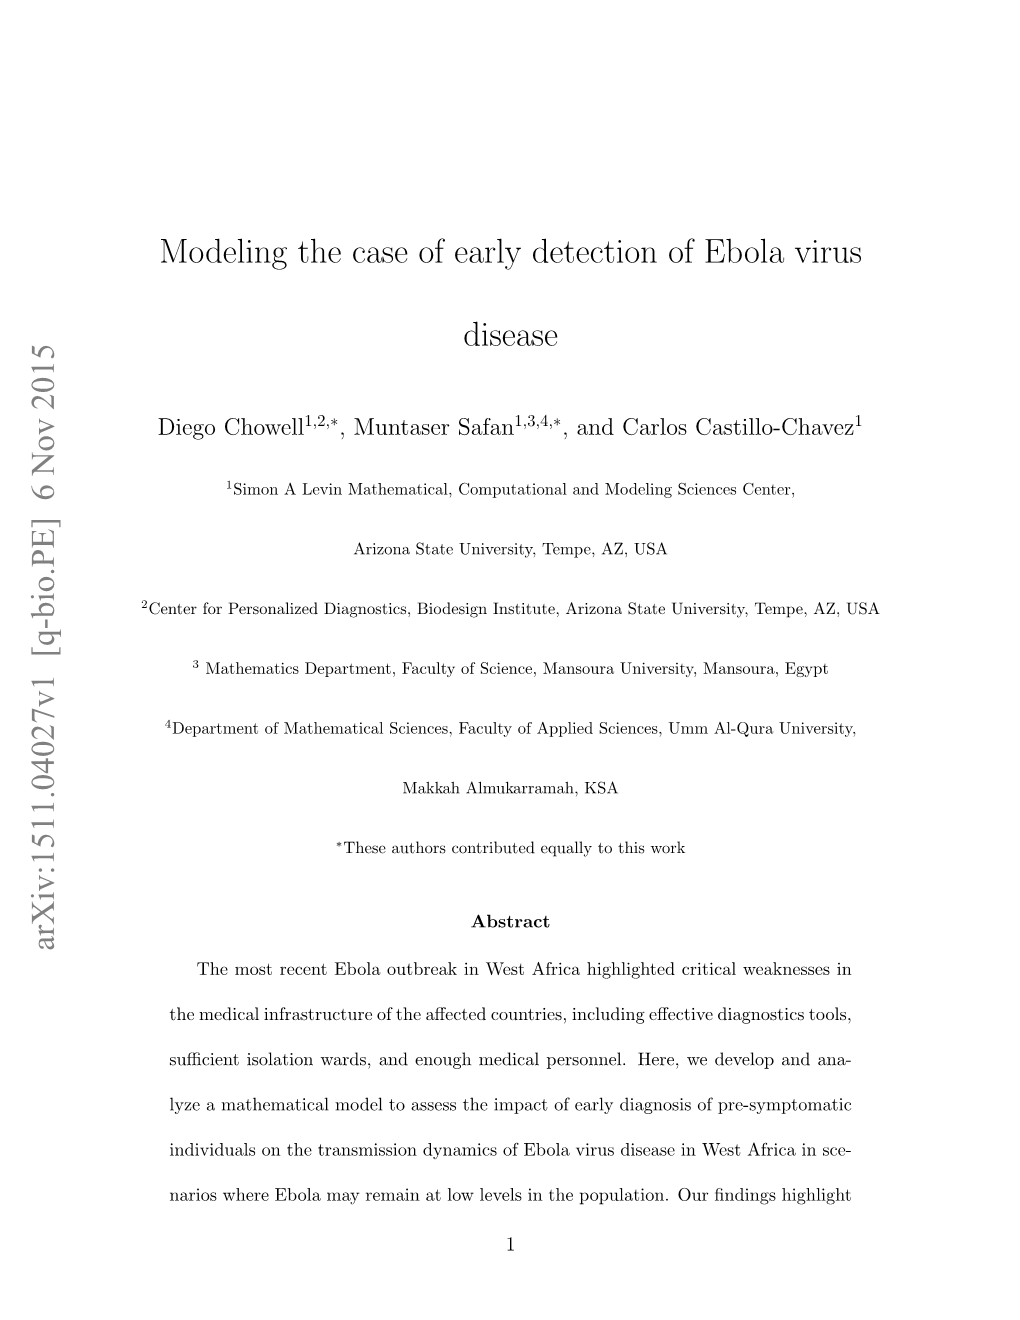 Modeling the Case of Early Detection of Ebola Virus Disease Arxiv